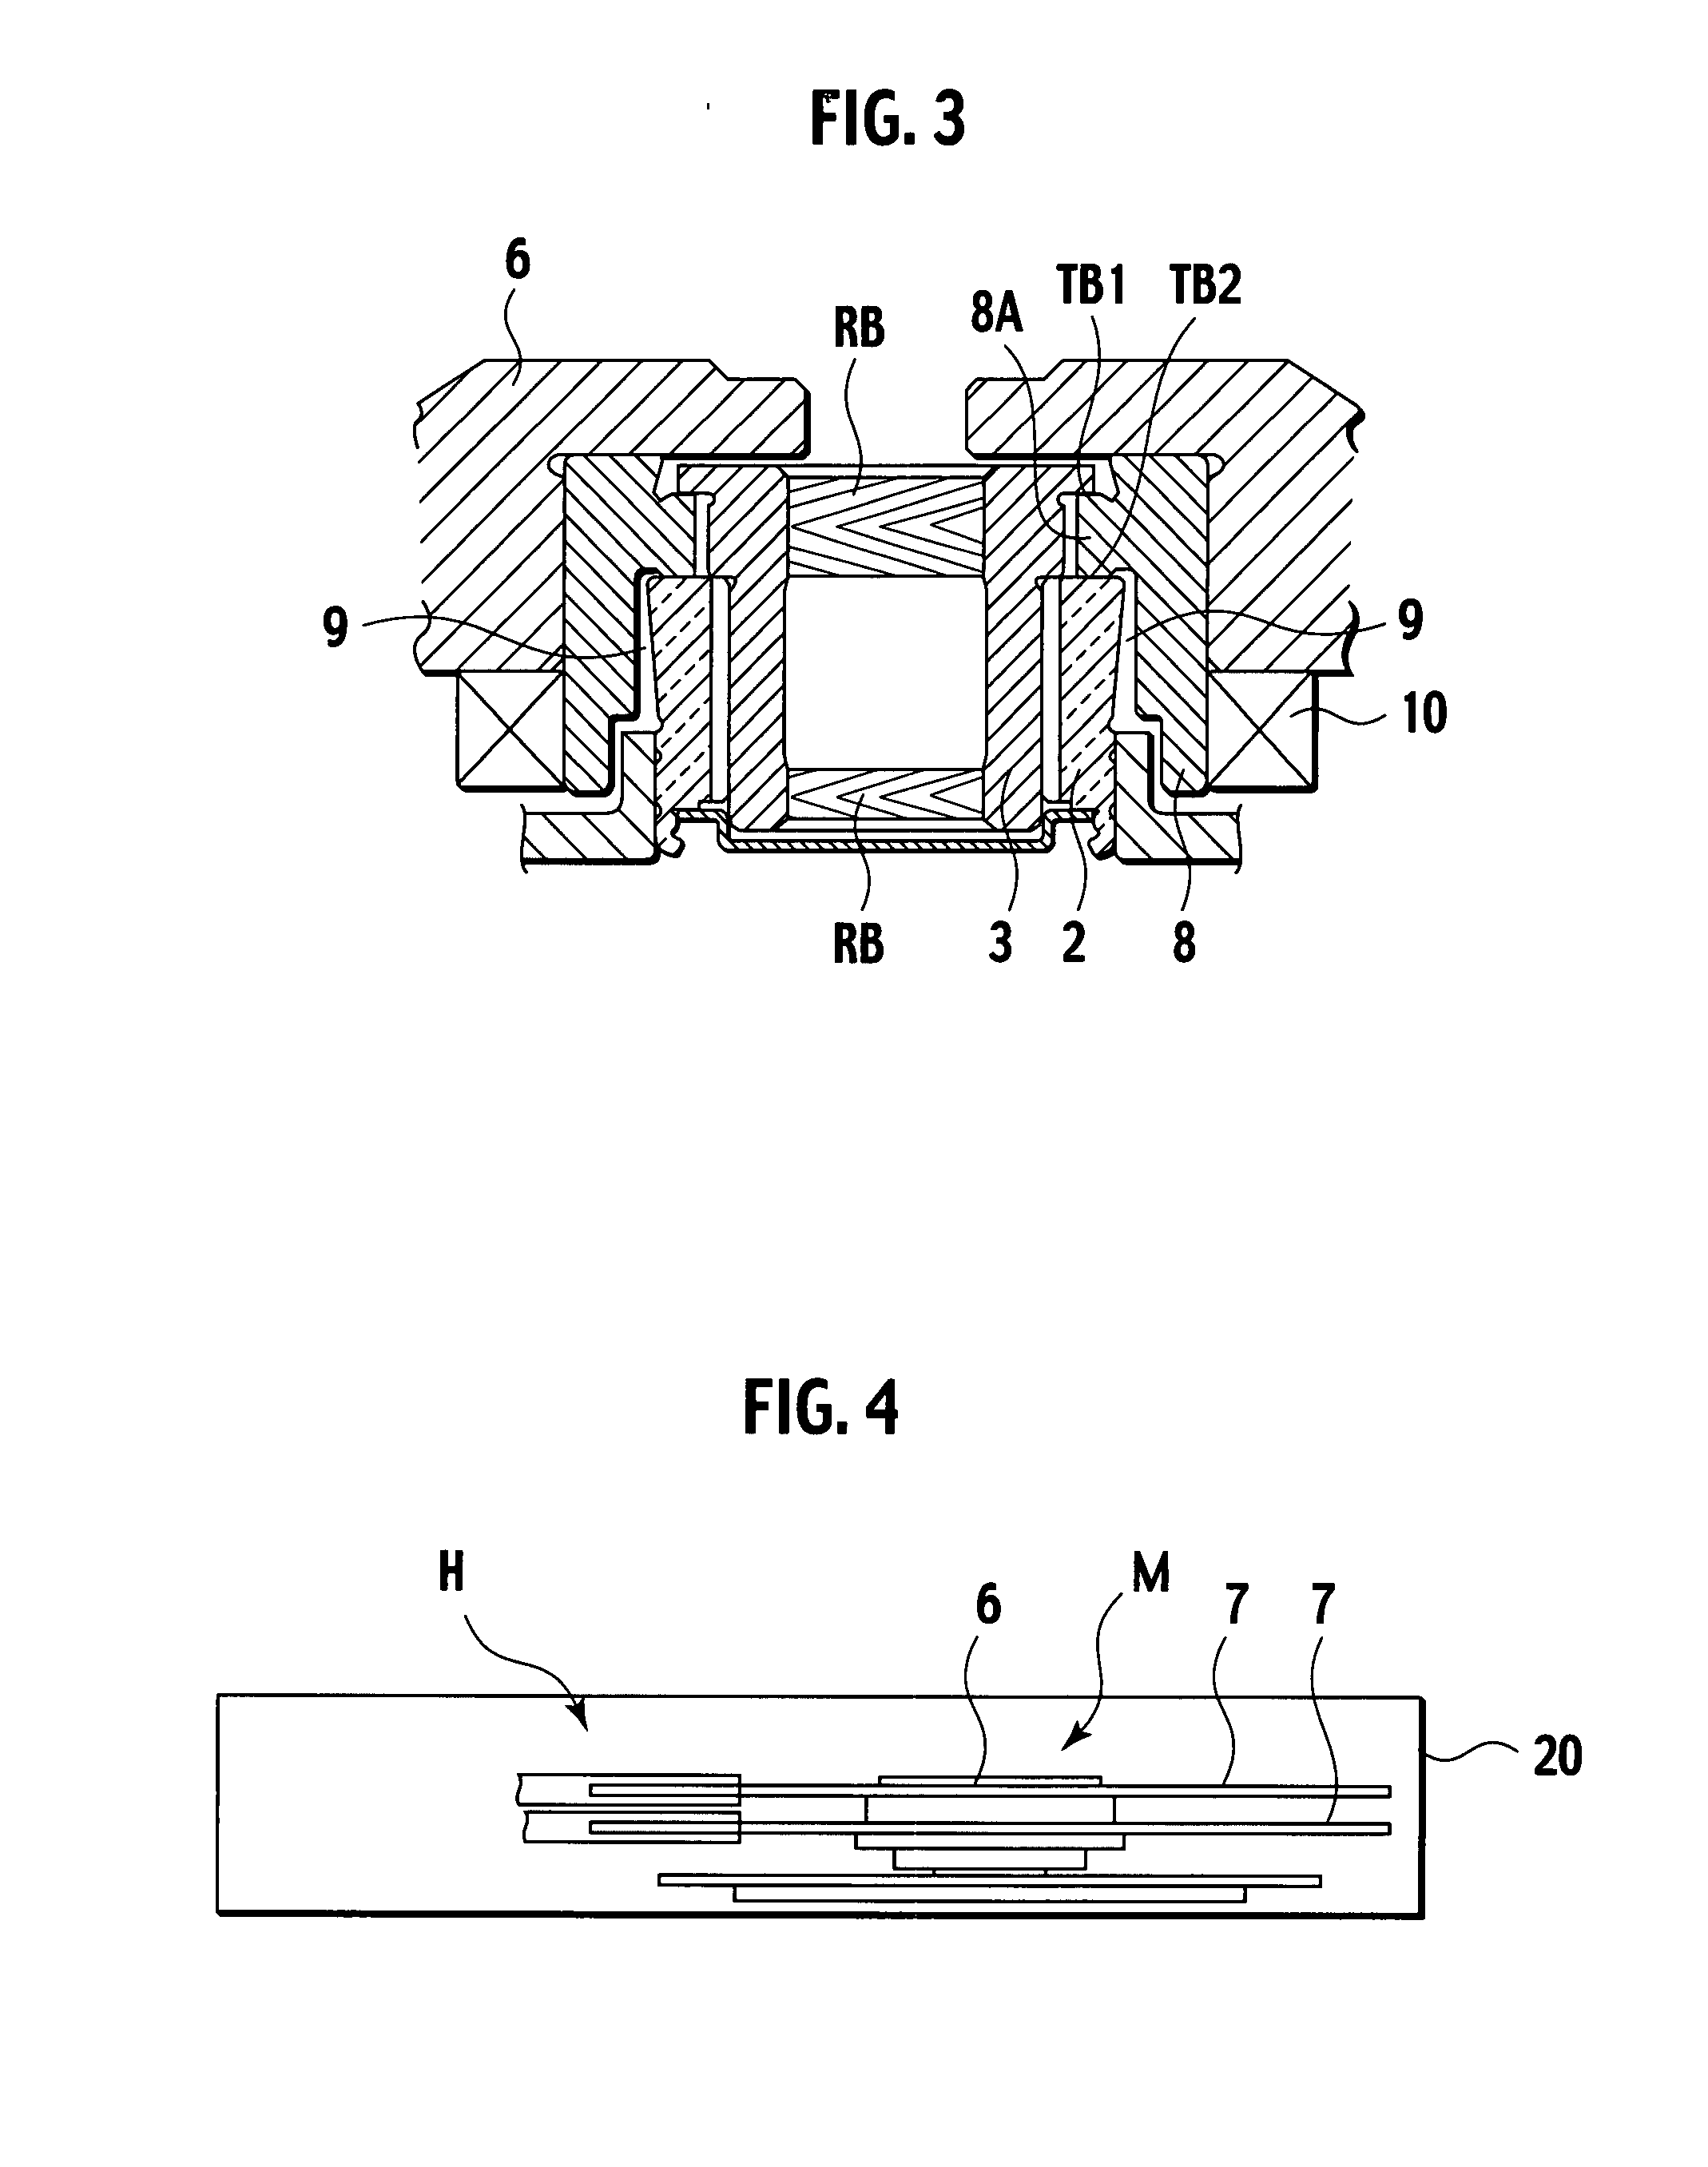 Motor and disc drive with motor